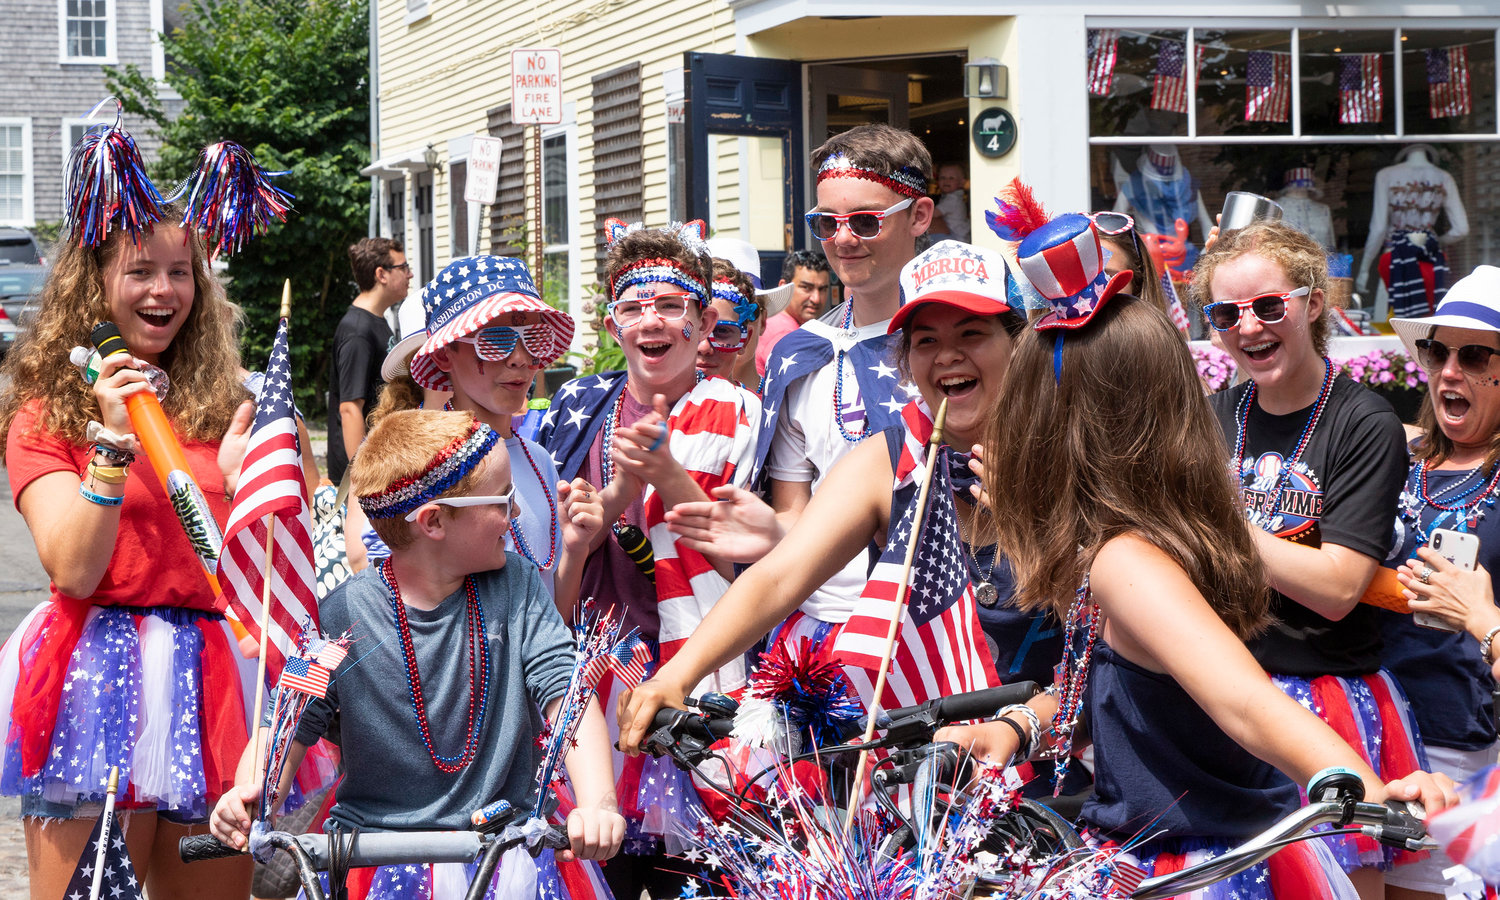 Youngsters dressed up in their patriotic best during Independence Day festivities downtown in 2018.